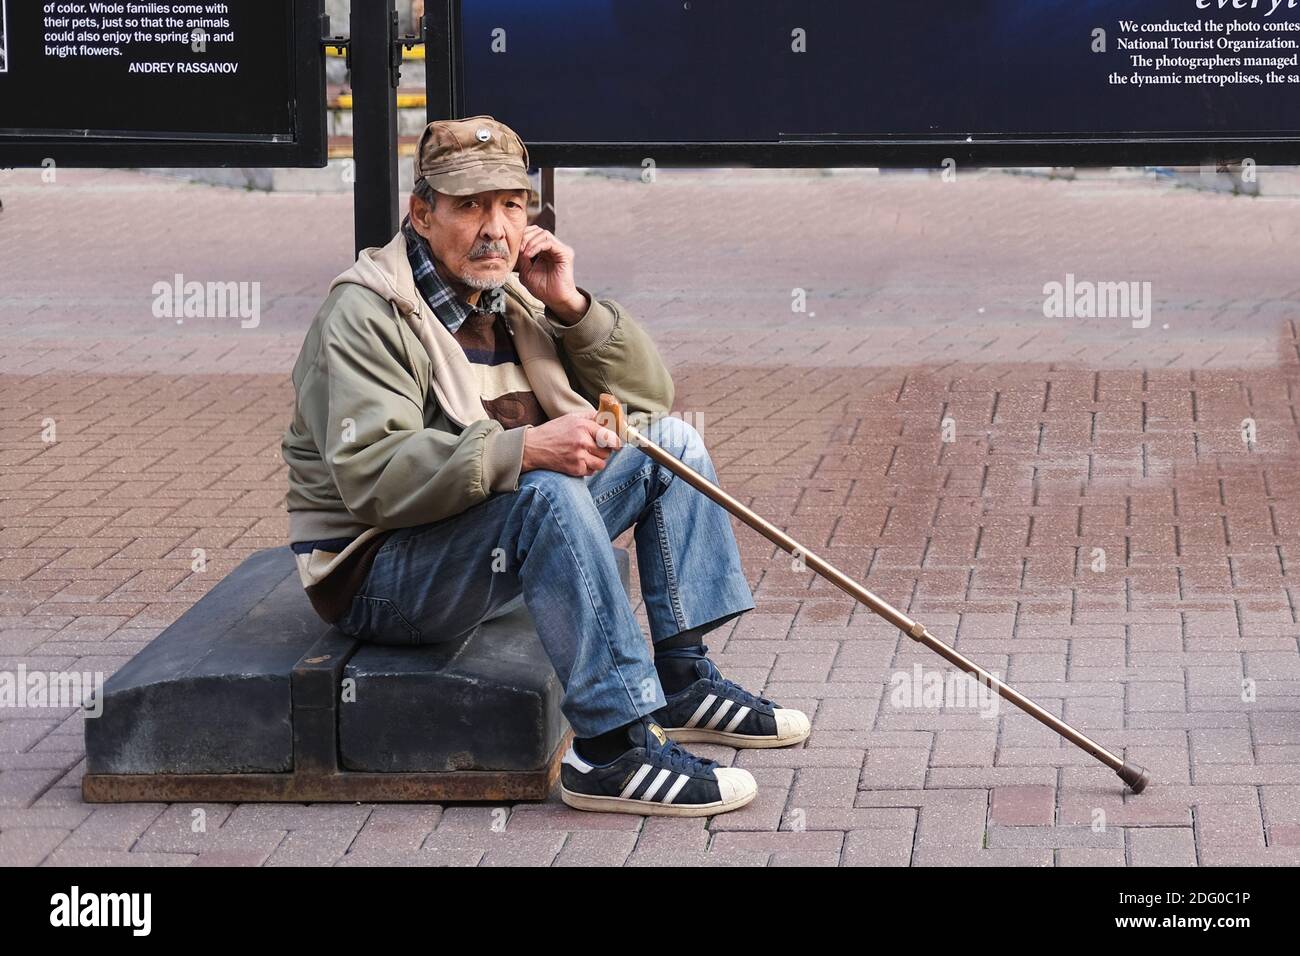 Frustrated Sad Elderly Man with stick sitting on street in solitude and looking at camera. Poverty and Despair, Social Pension Problems Stock Photo